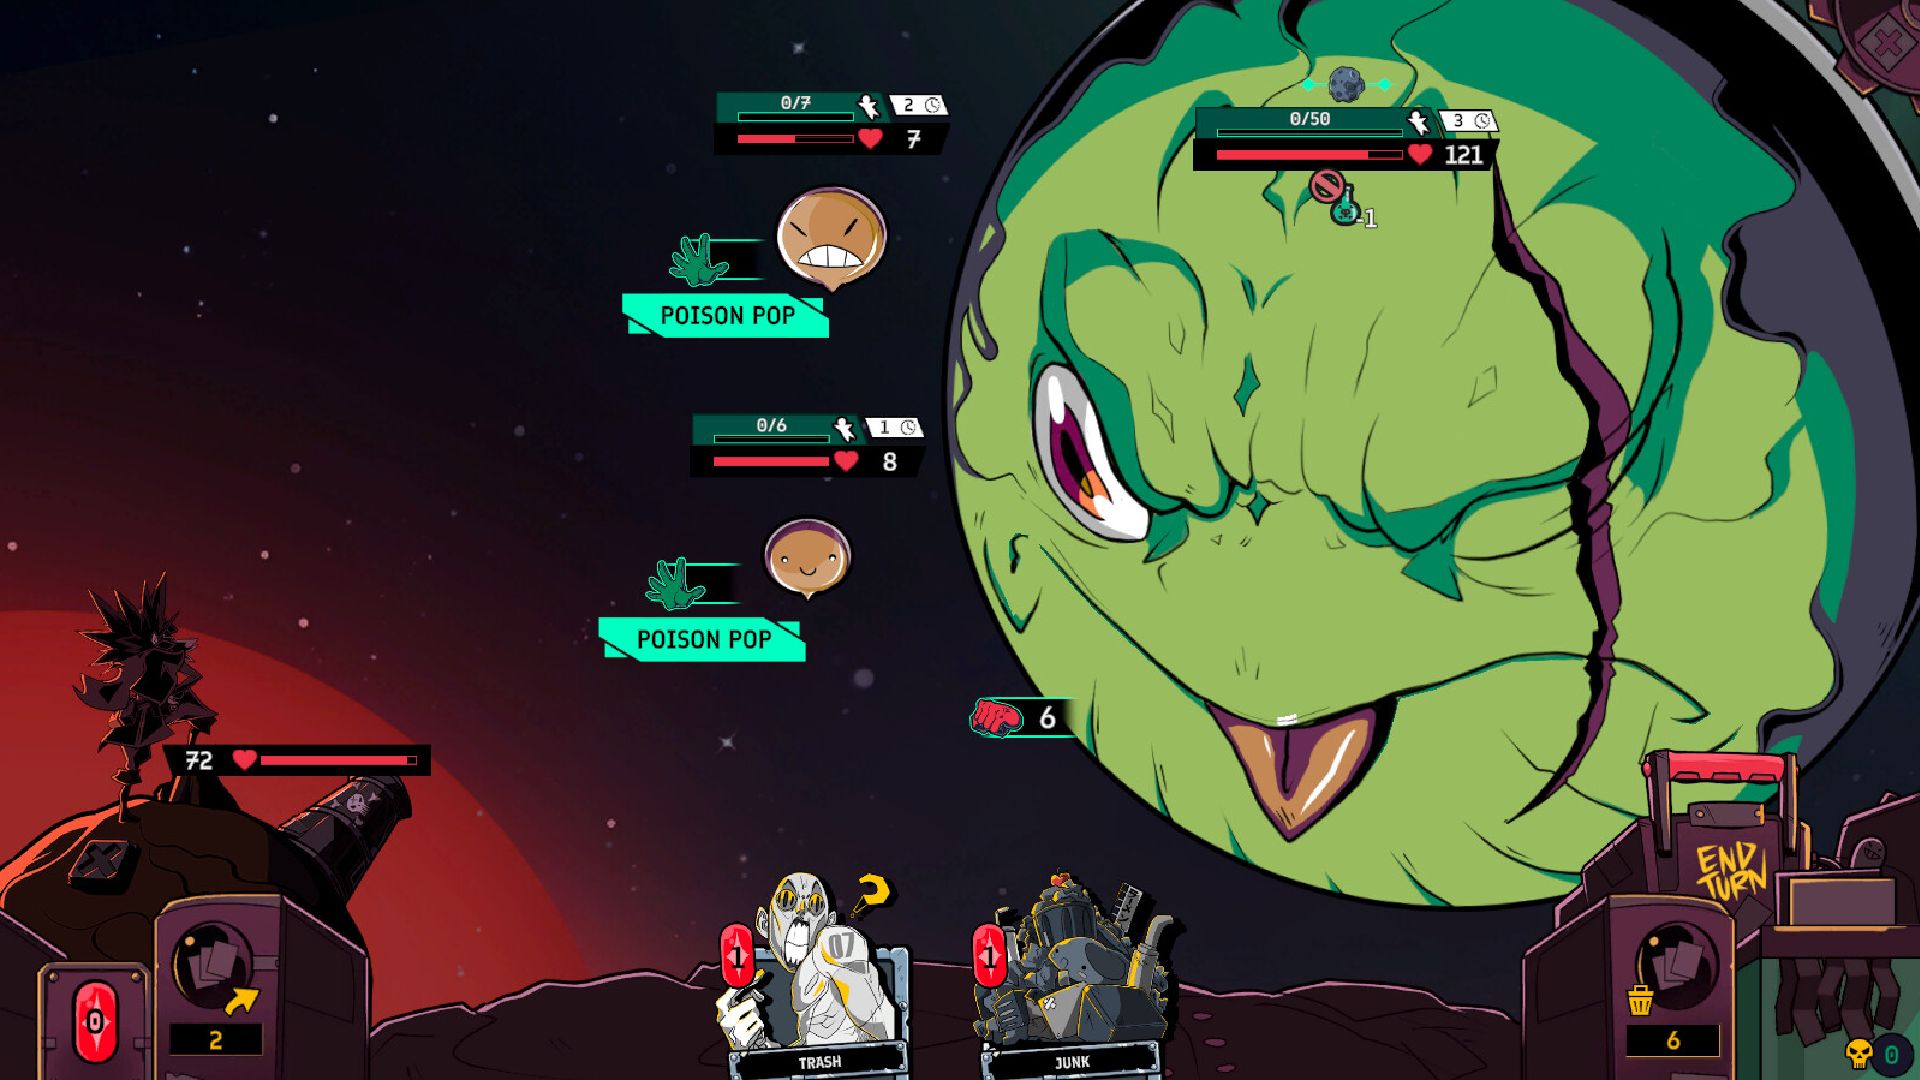 The player fighting a planet in Zet Zillions